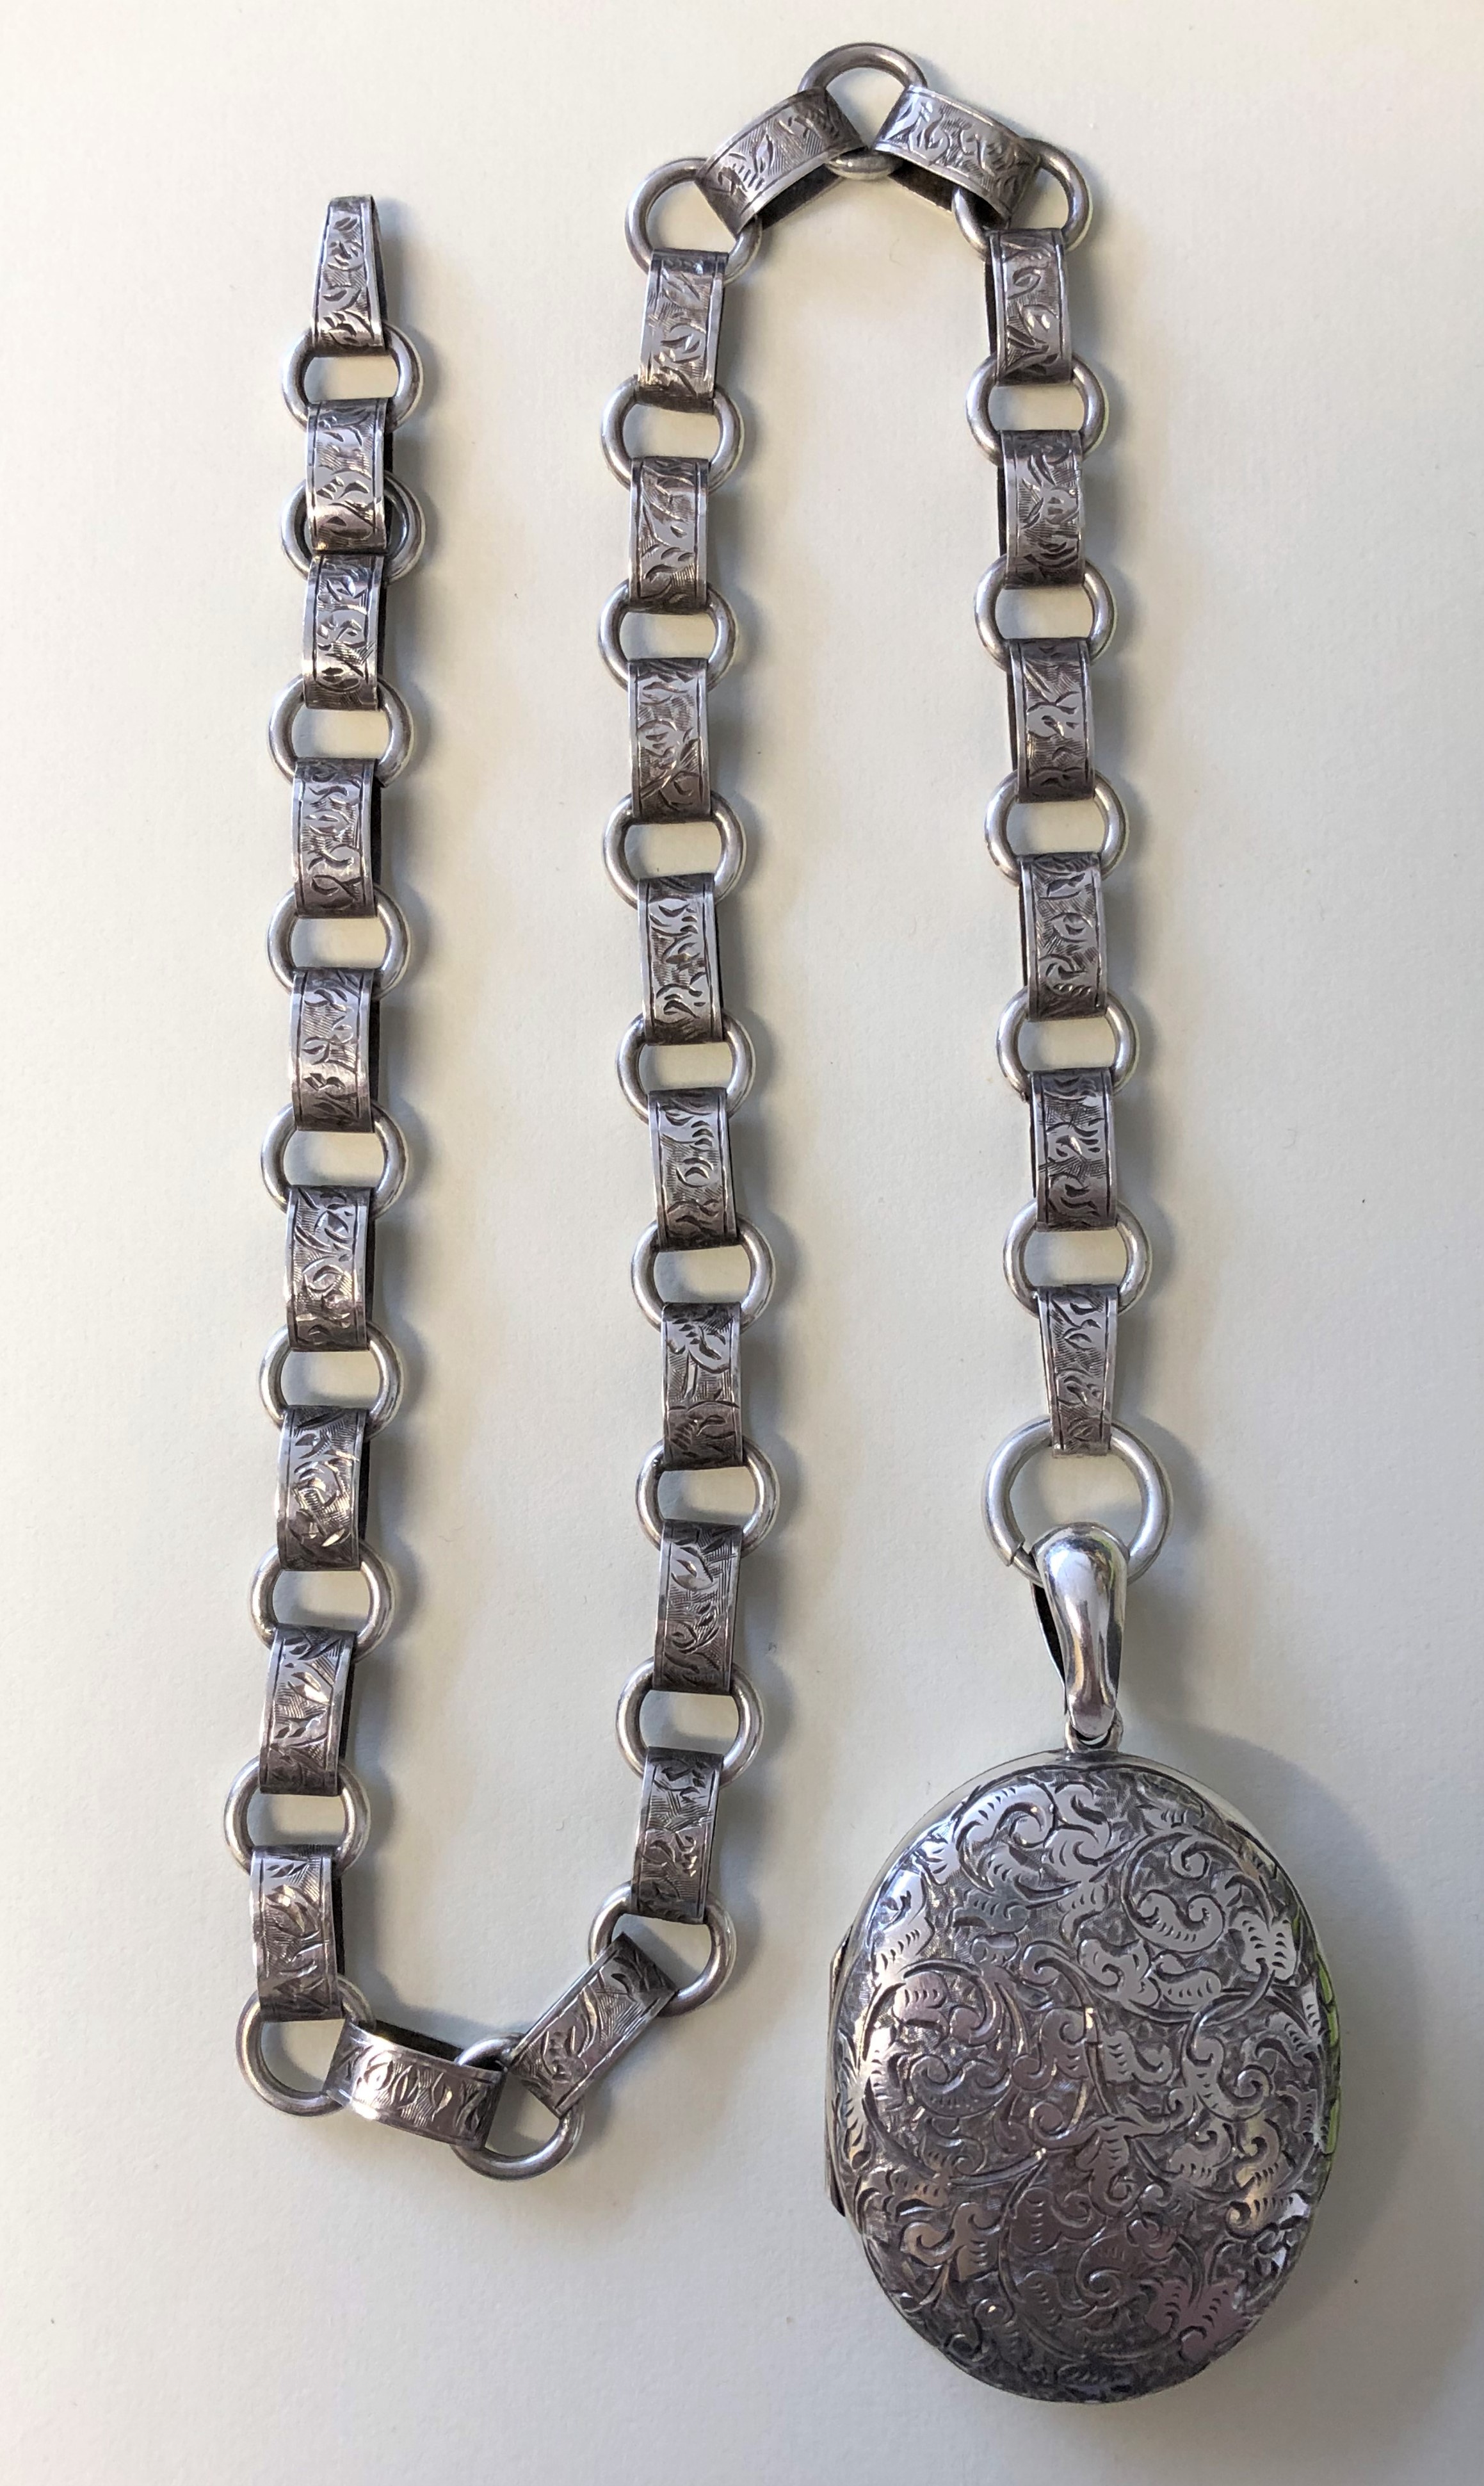 SILVER OVAL ENGRAVED LOCKET ON A SILVER ENGRAVED LINK CHAIN 38.